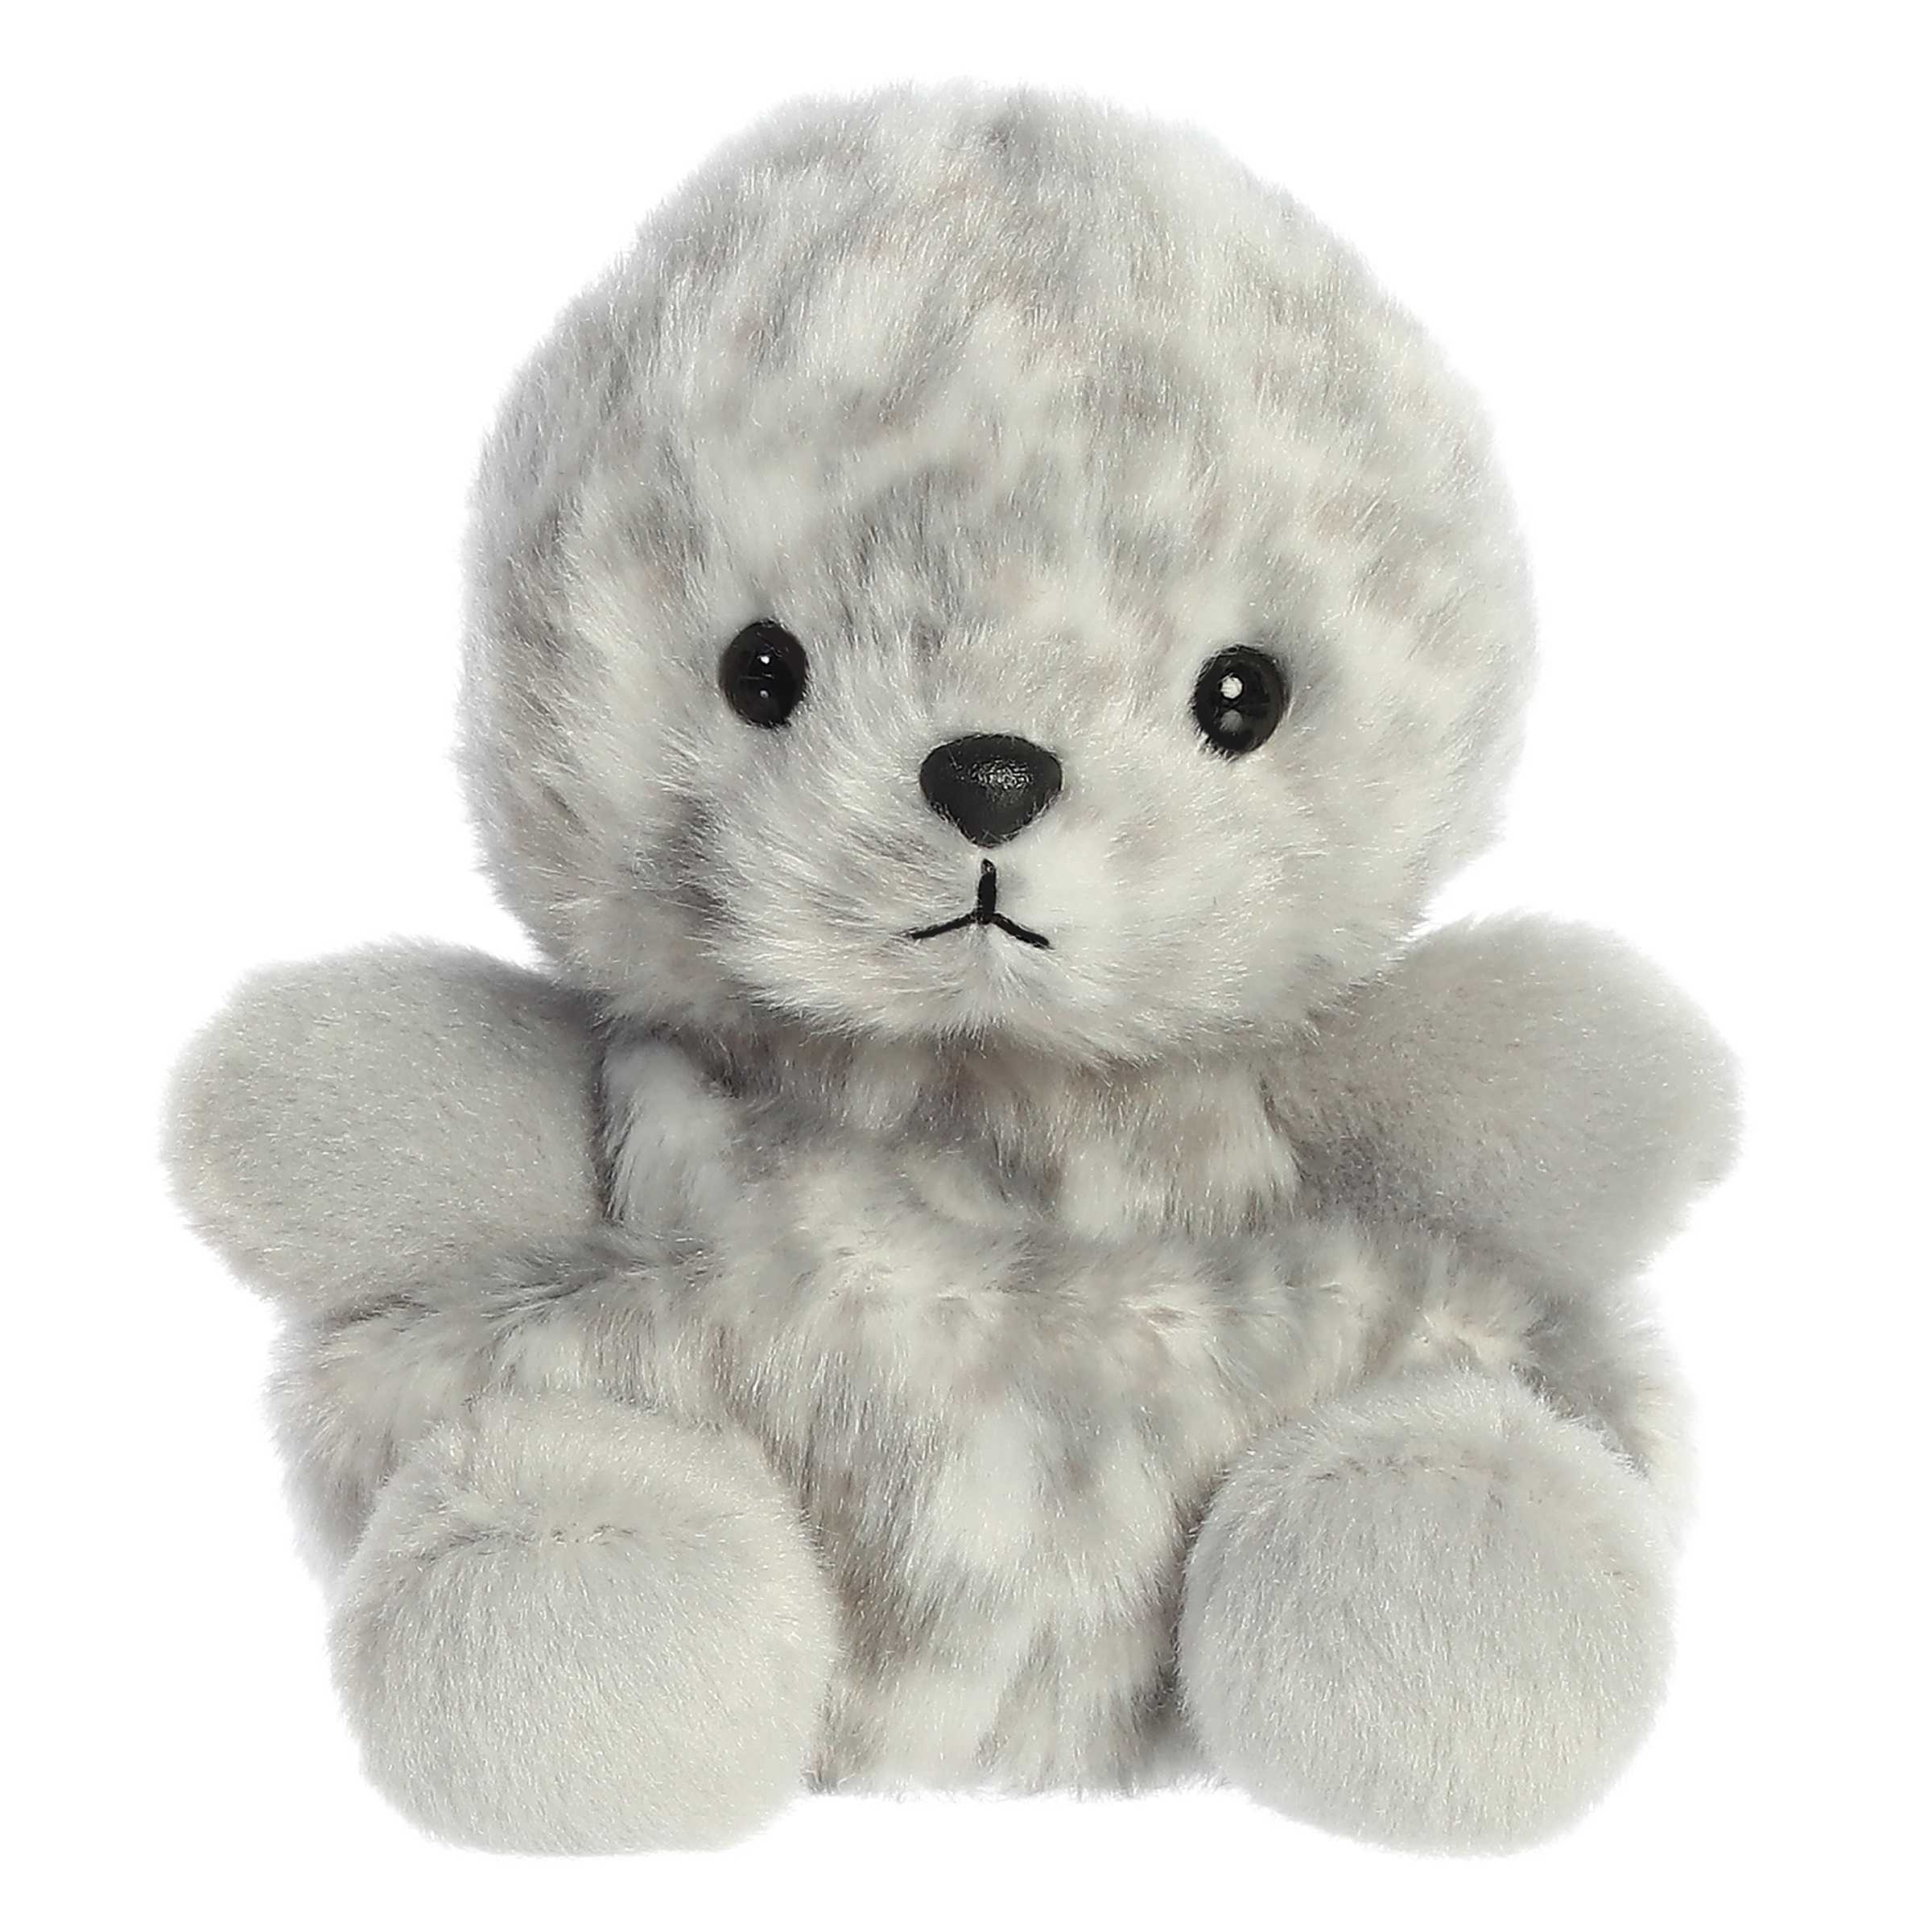 Marina is a plushie that exudes trustworthiness with her soft, mottled grey fur that mimics the swirling sea.